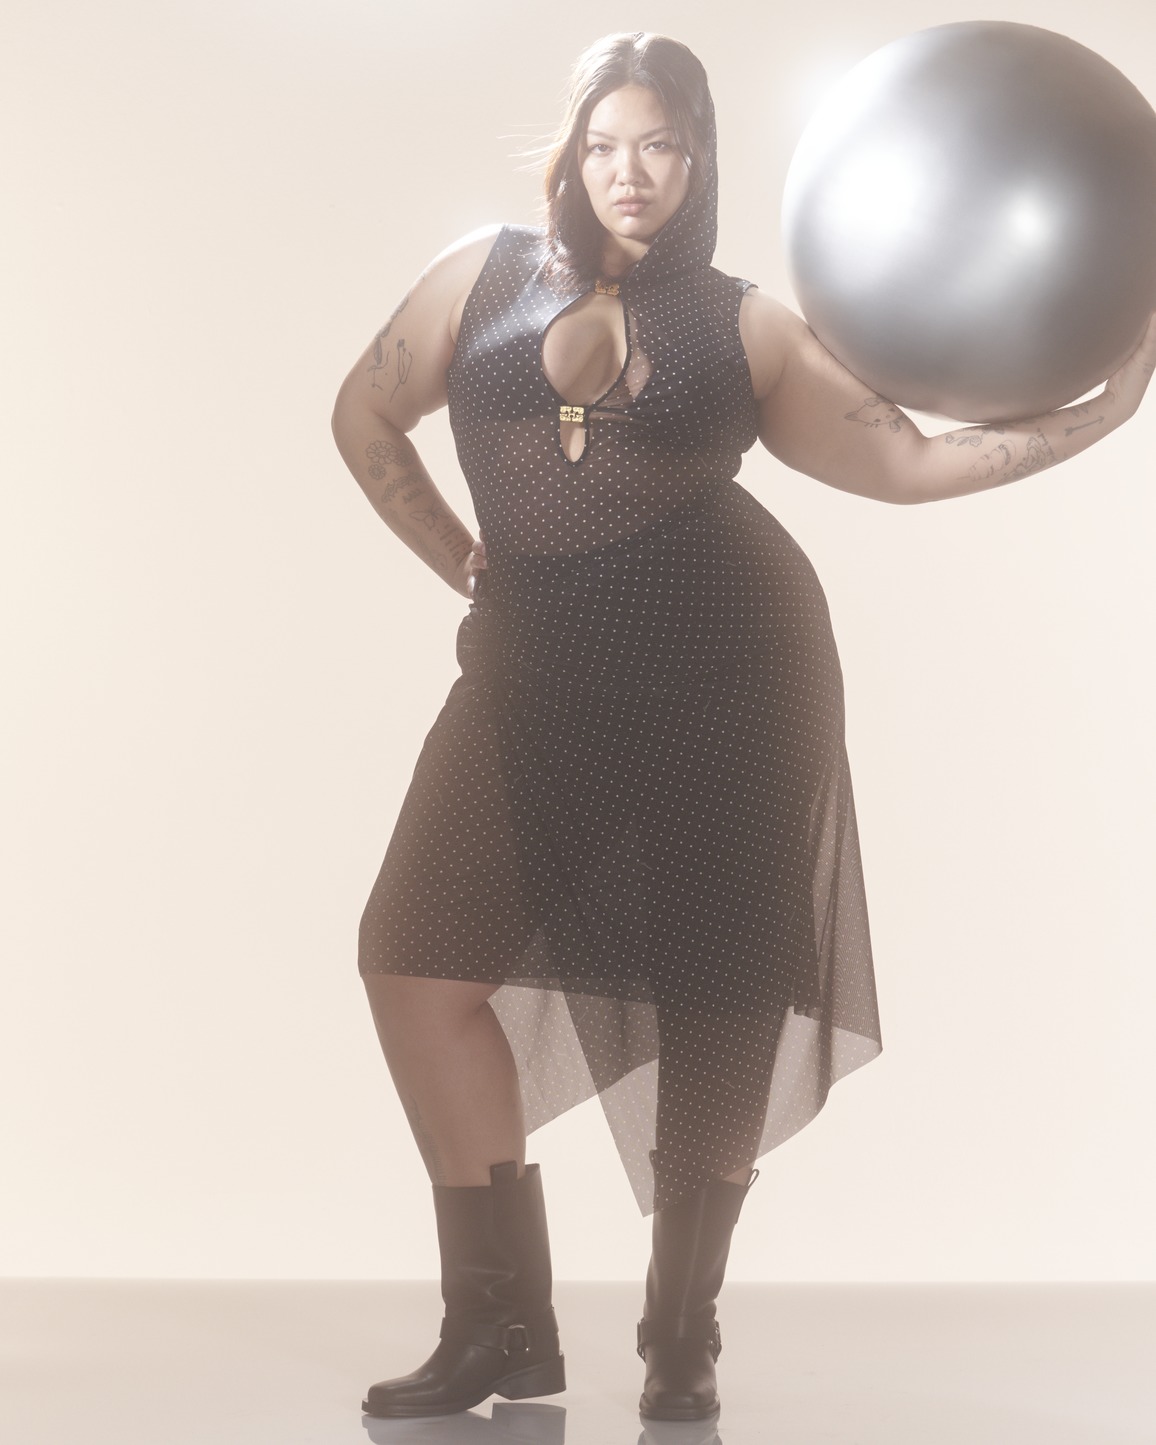 Ganni x Paloma Elsesser Campagin Photography: model holding a silver ball